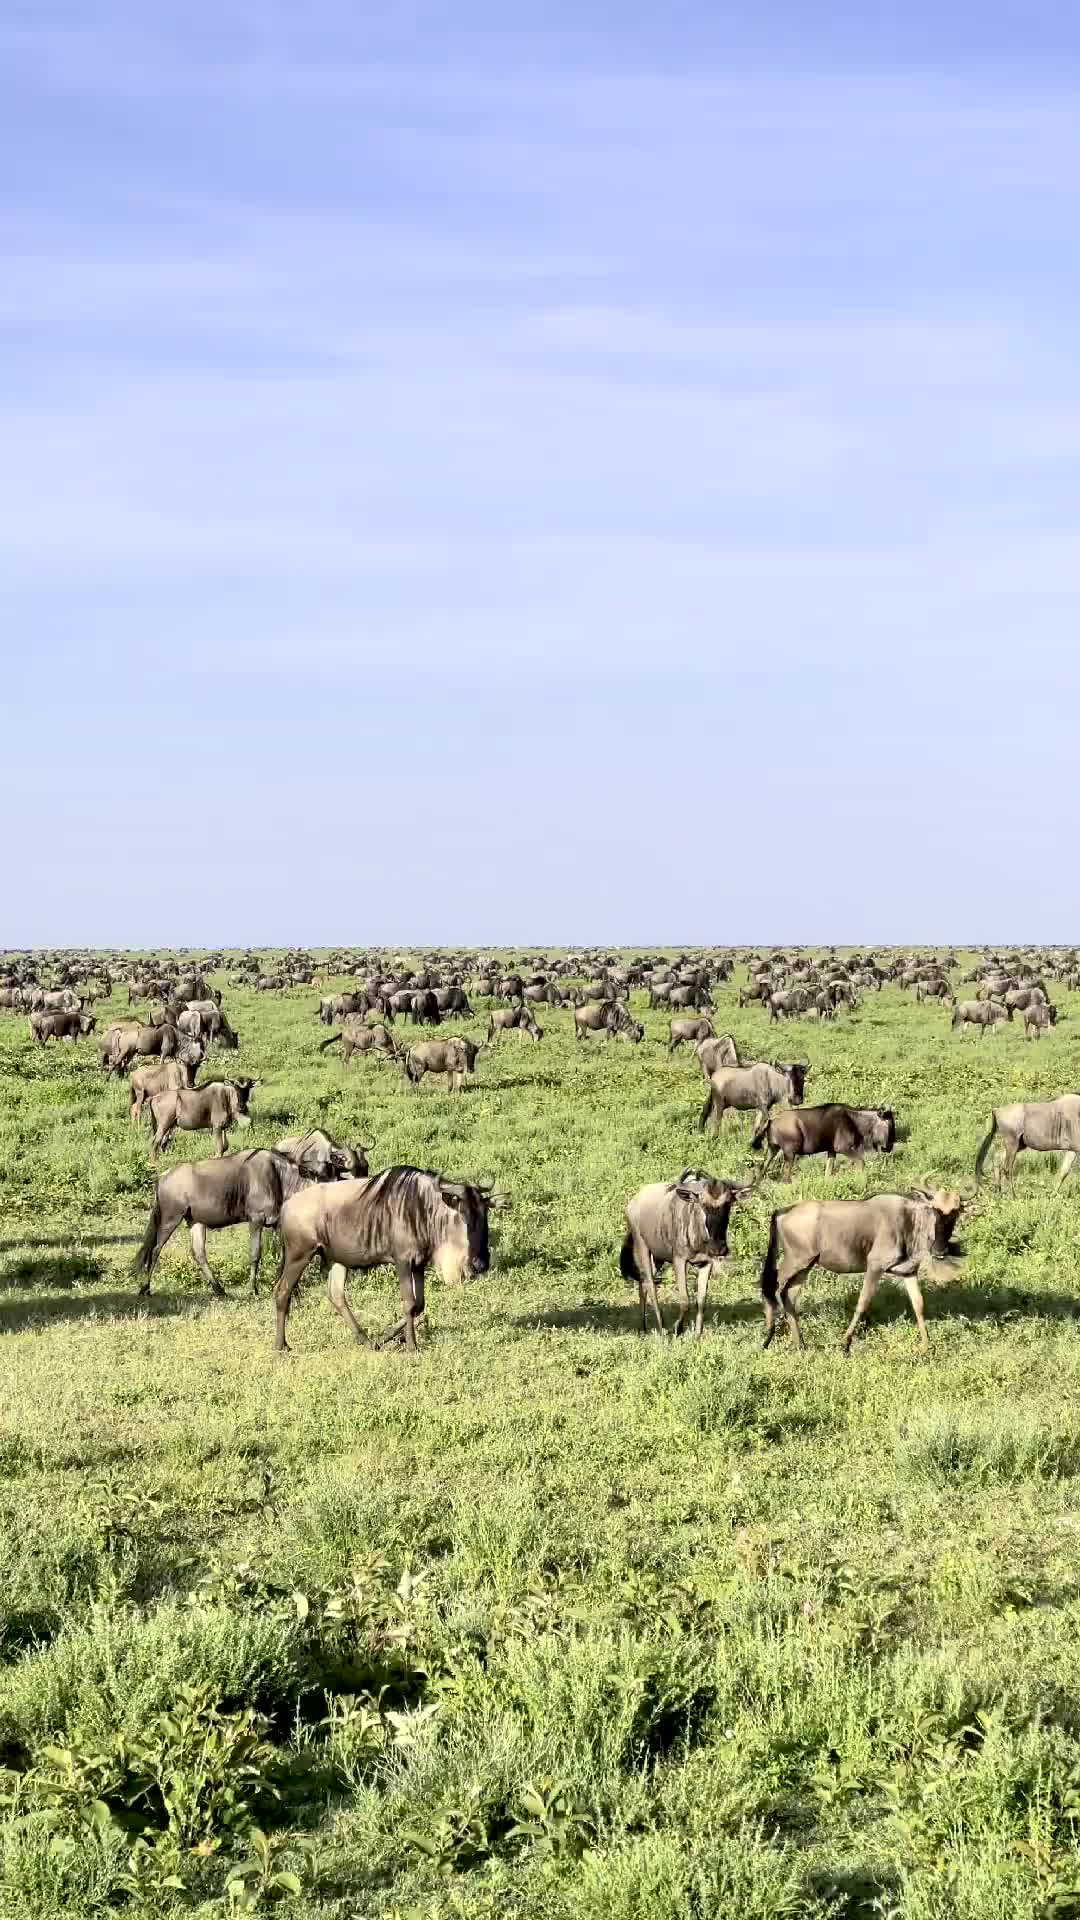 Have you ever seen the Great Migration? Well, it’s a thing of beauty, that’s for certain.

Been in Ndutu for the past week, an experience filled with magnificent sights including the great migratory herds of East Africa made up of nearly 2 million wildebeest, gazelle & zebra.

#TandaAfrikaSafari #serengeti #ndutu #safari #africa #nature #marlondutoit